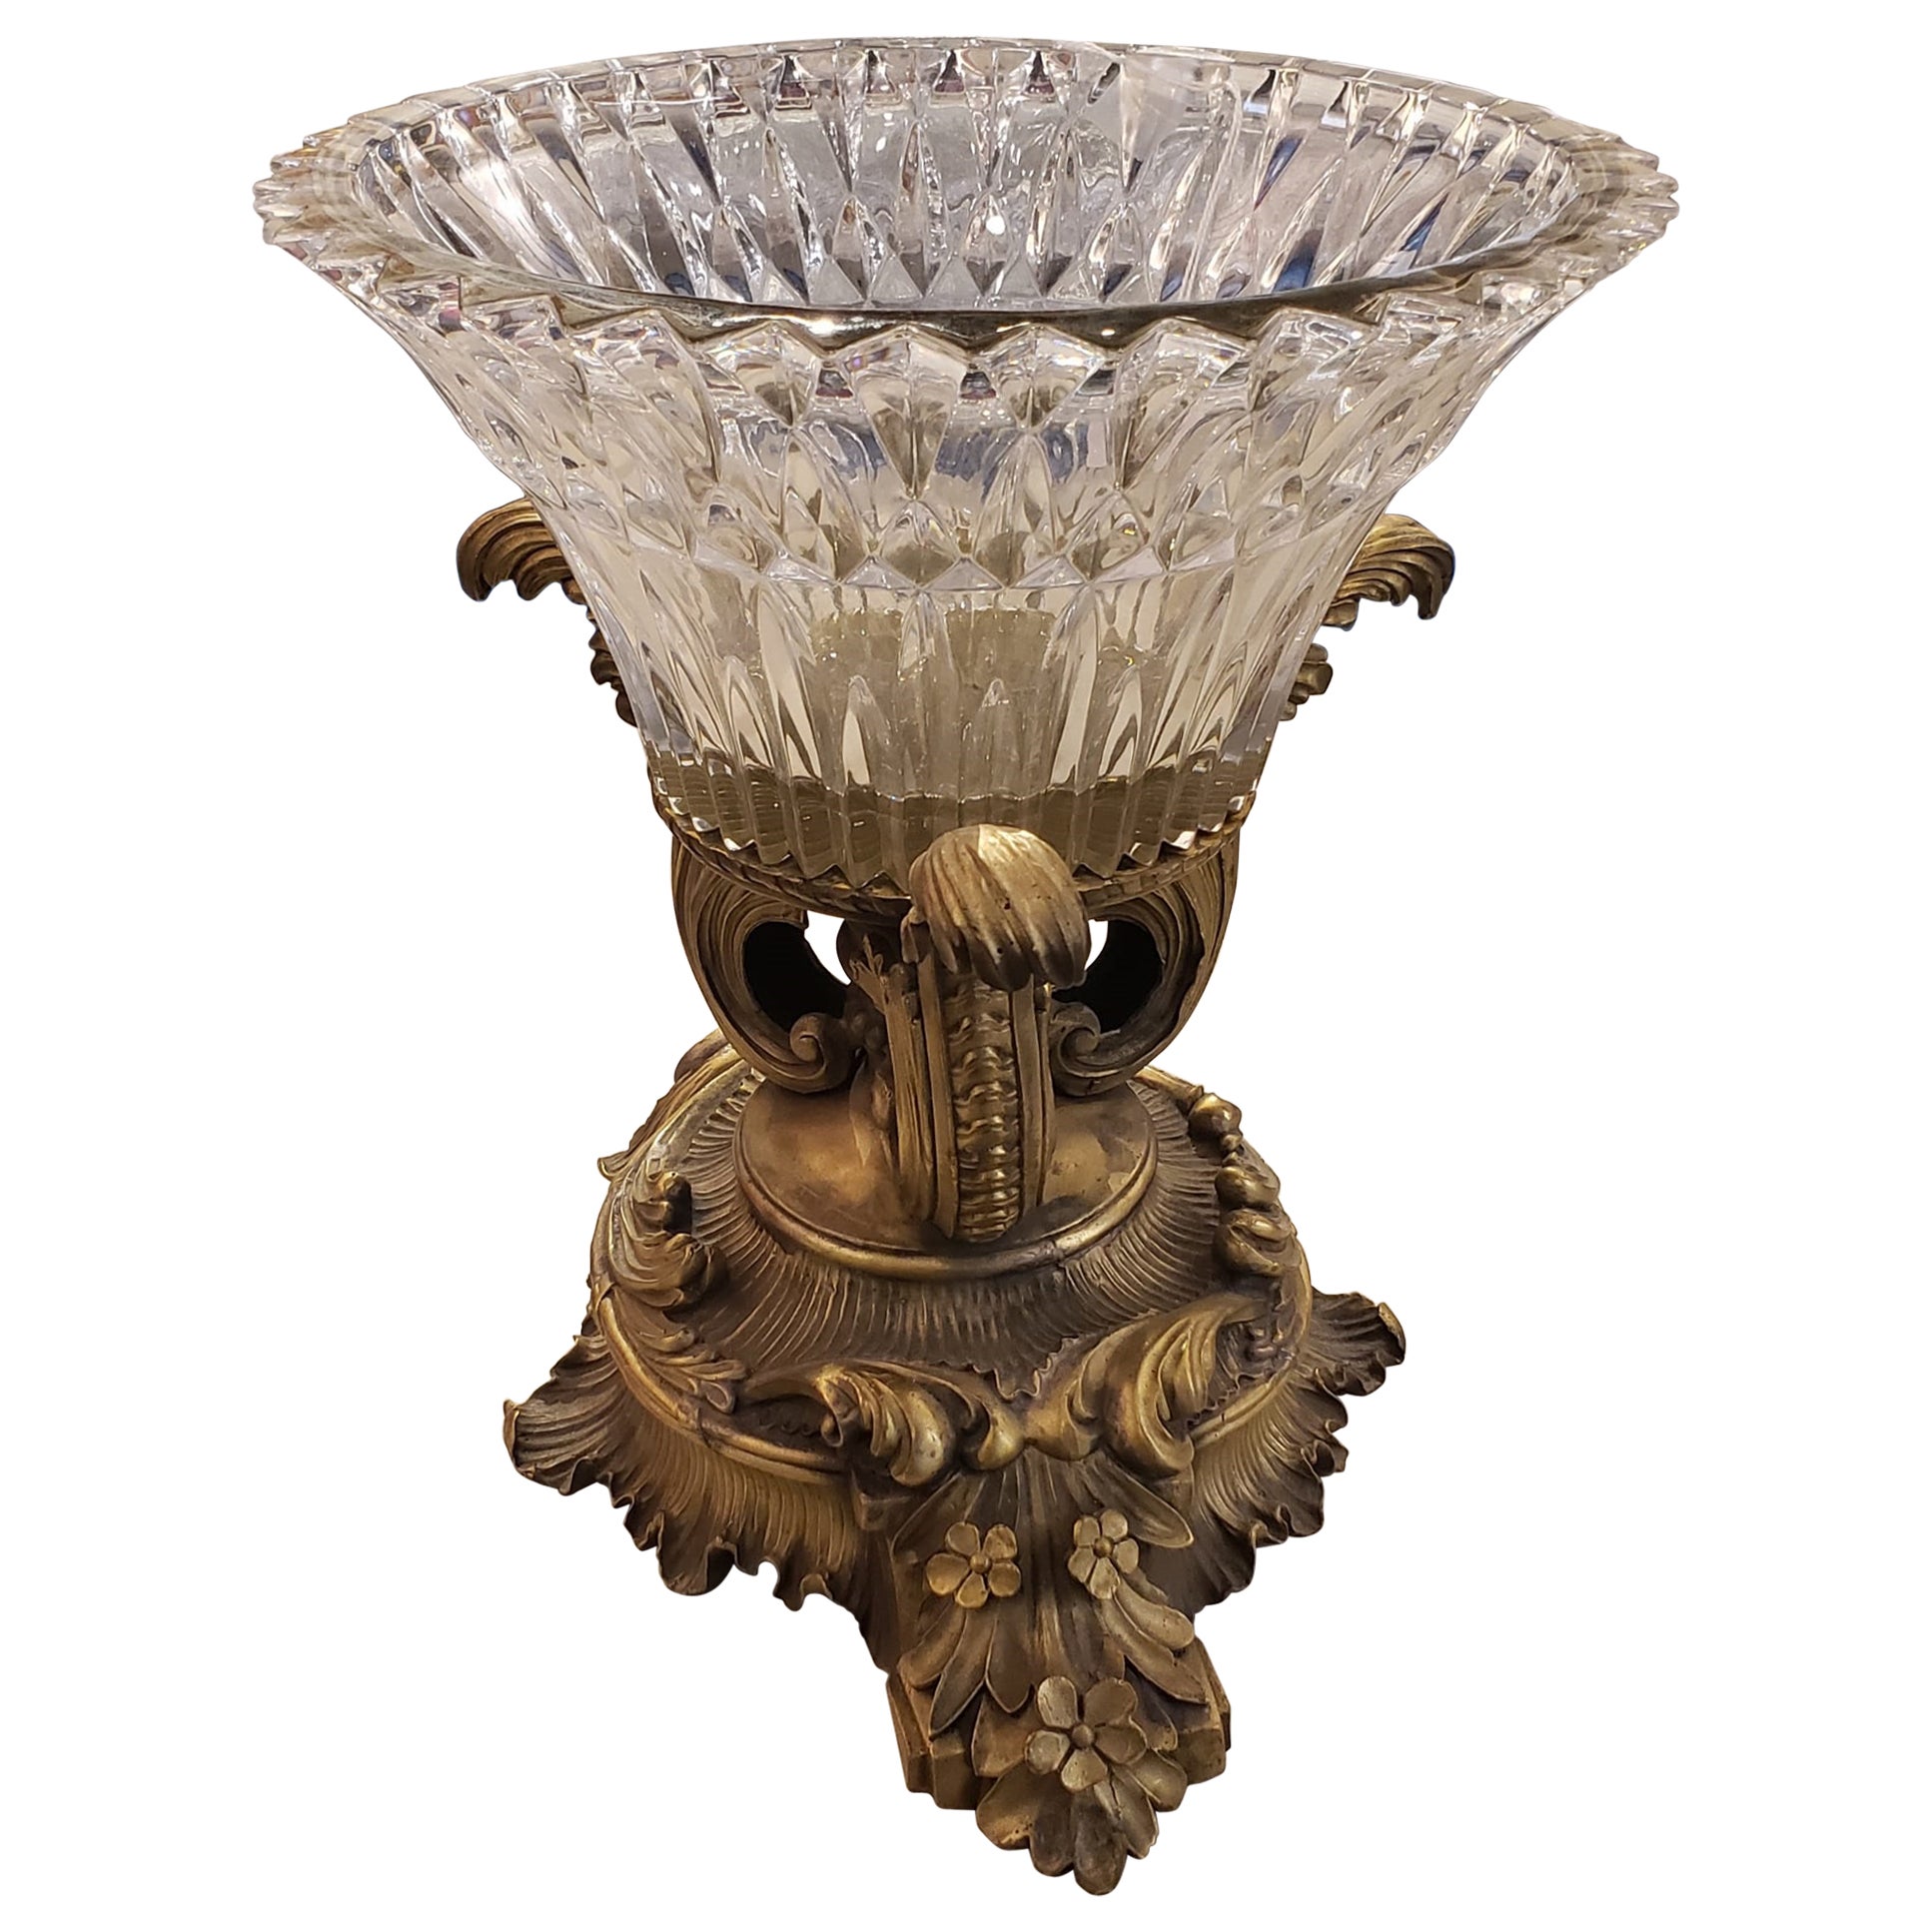 Rococo Style Molded Glass Mounted Patinated Metal and Brass Centerpiece For Sale